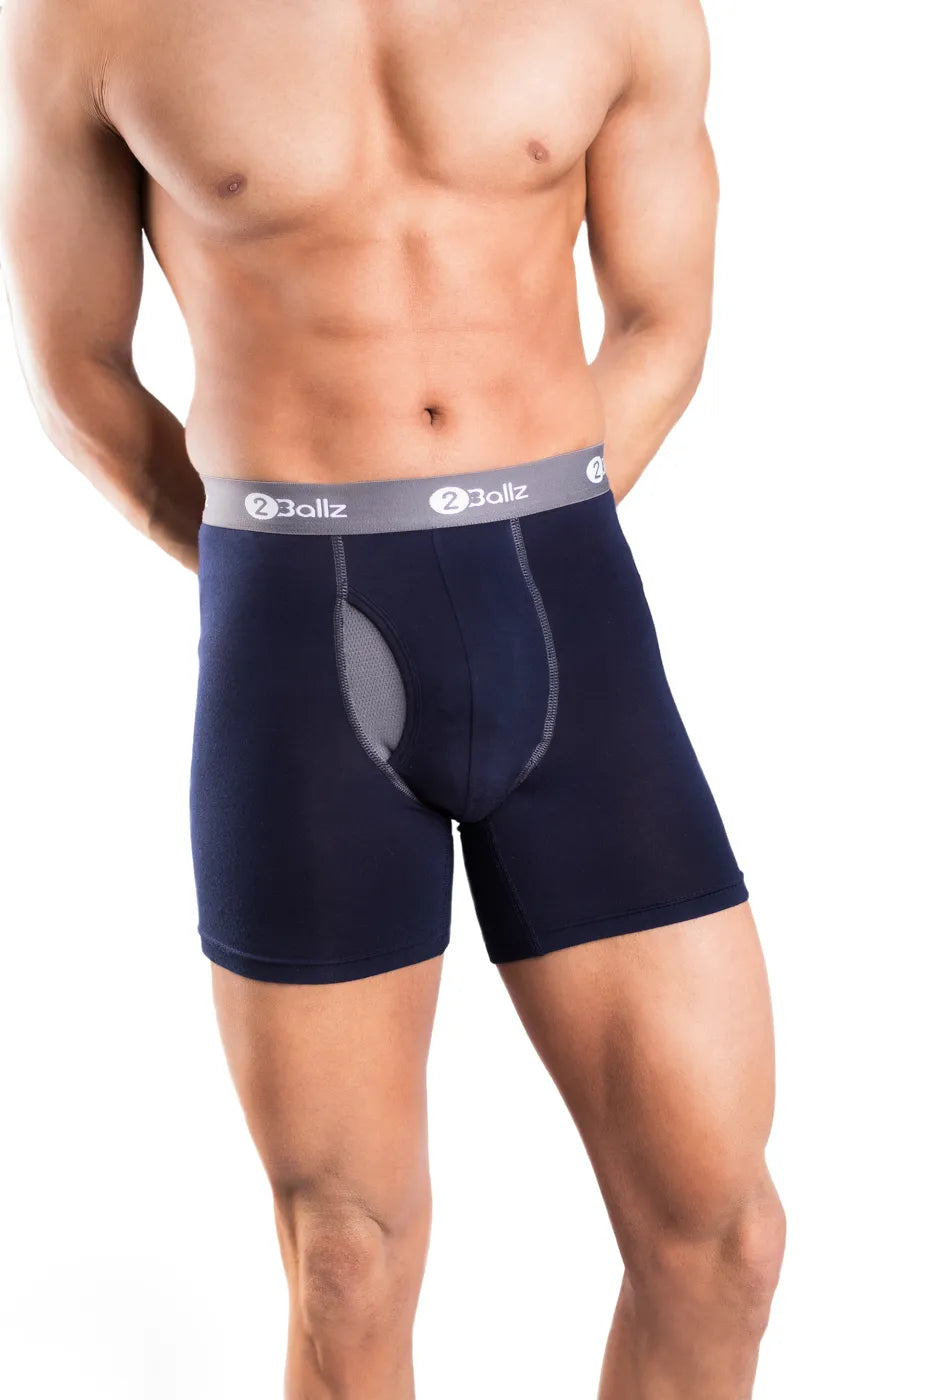 Buy 2BALLZ Underwear for Men Pouch Support Technology -Breathable